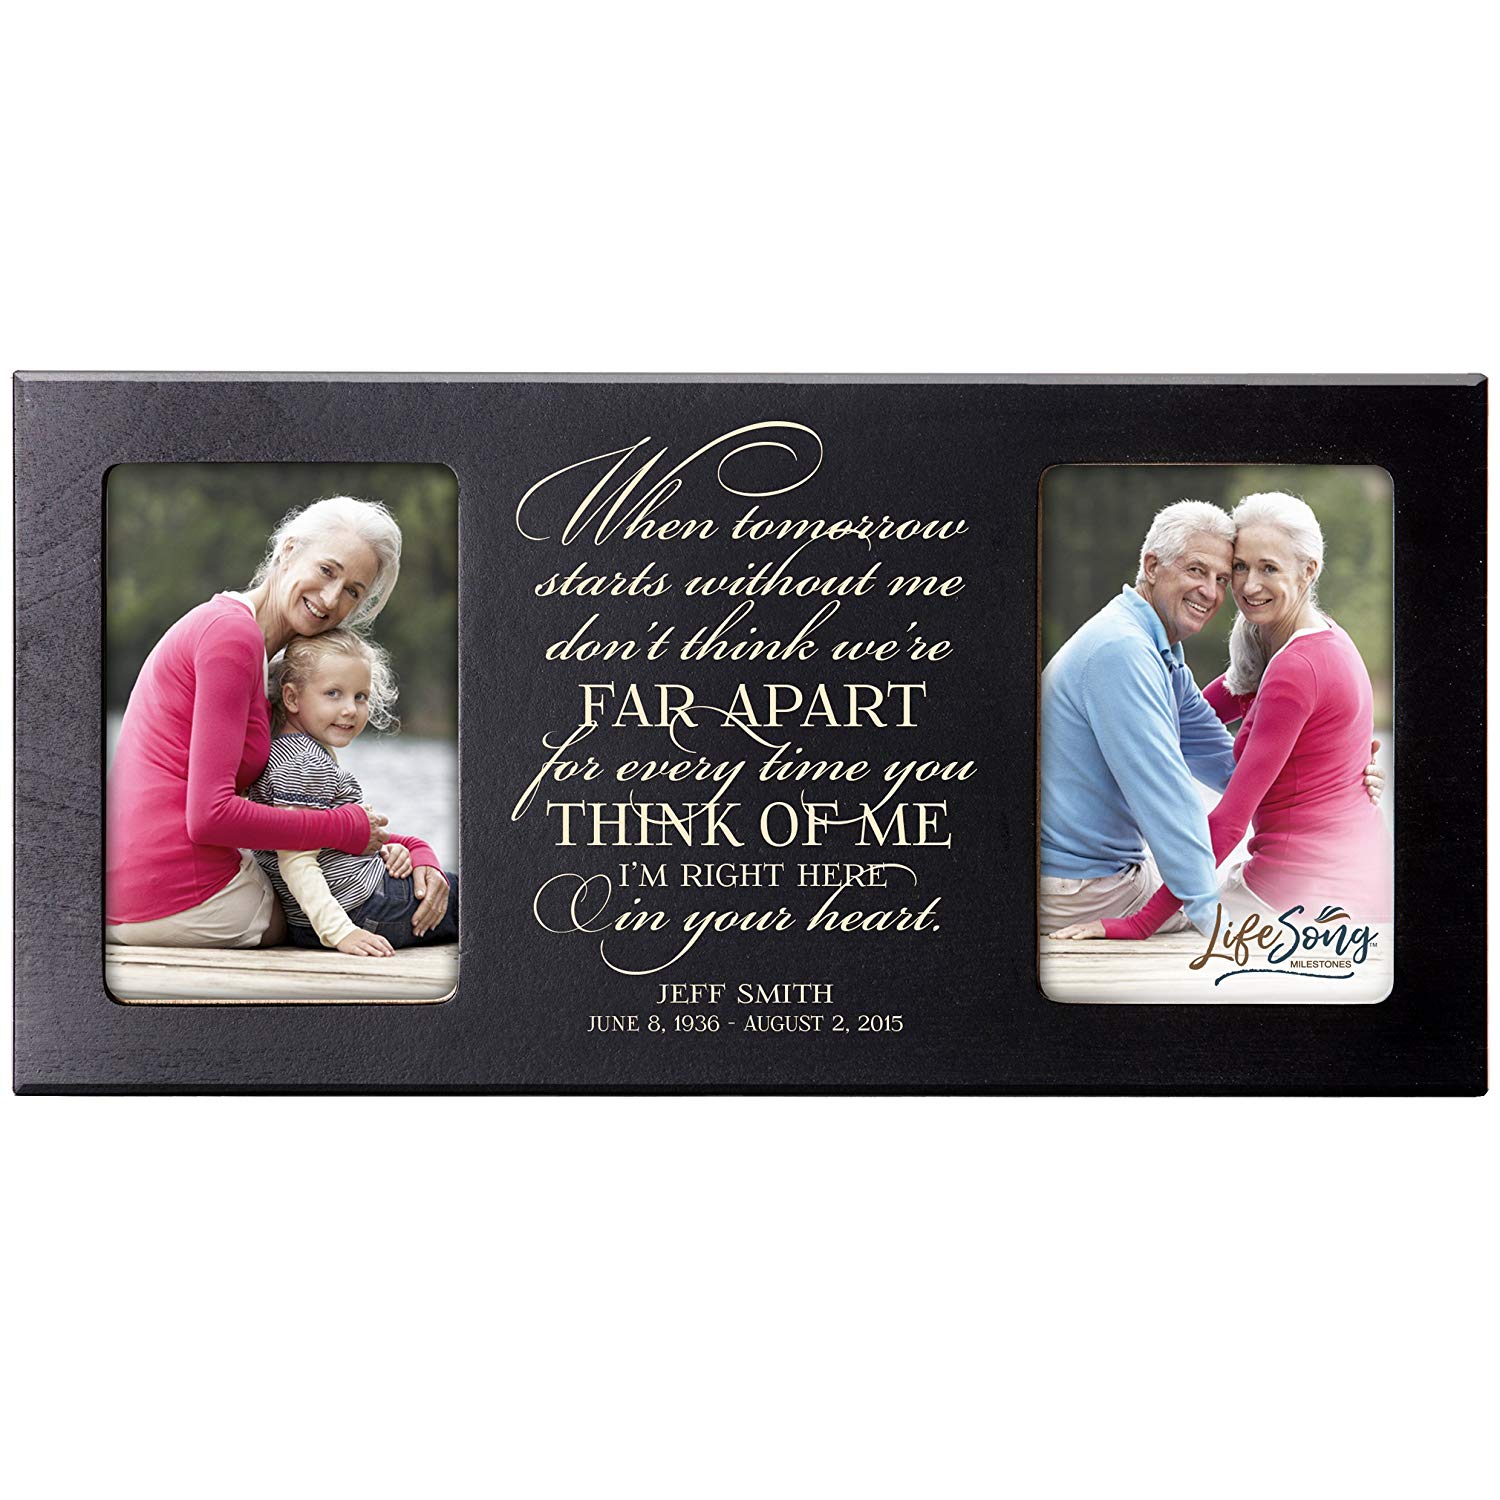 My Heart Engraved Wood Picture Frame - 4x6